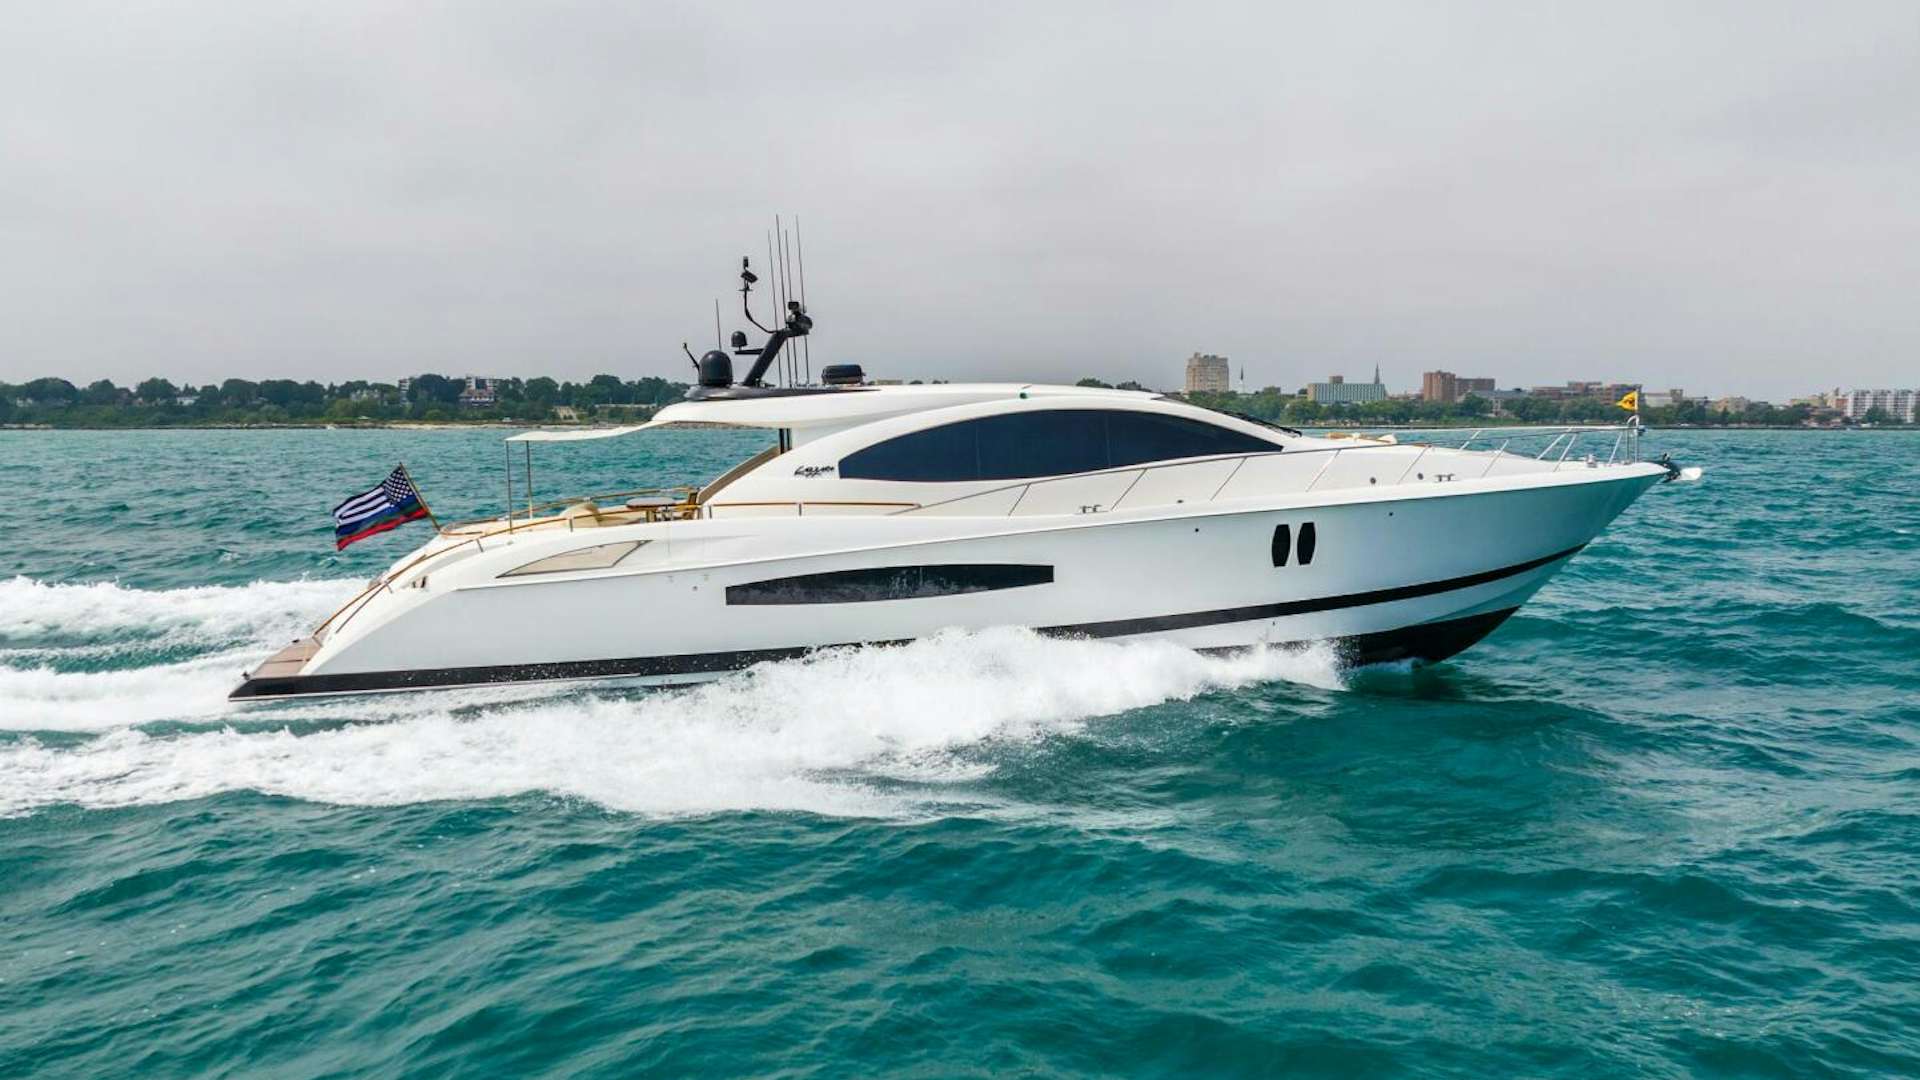 Committed
Yacht for Sale